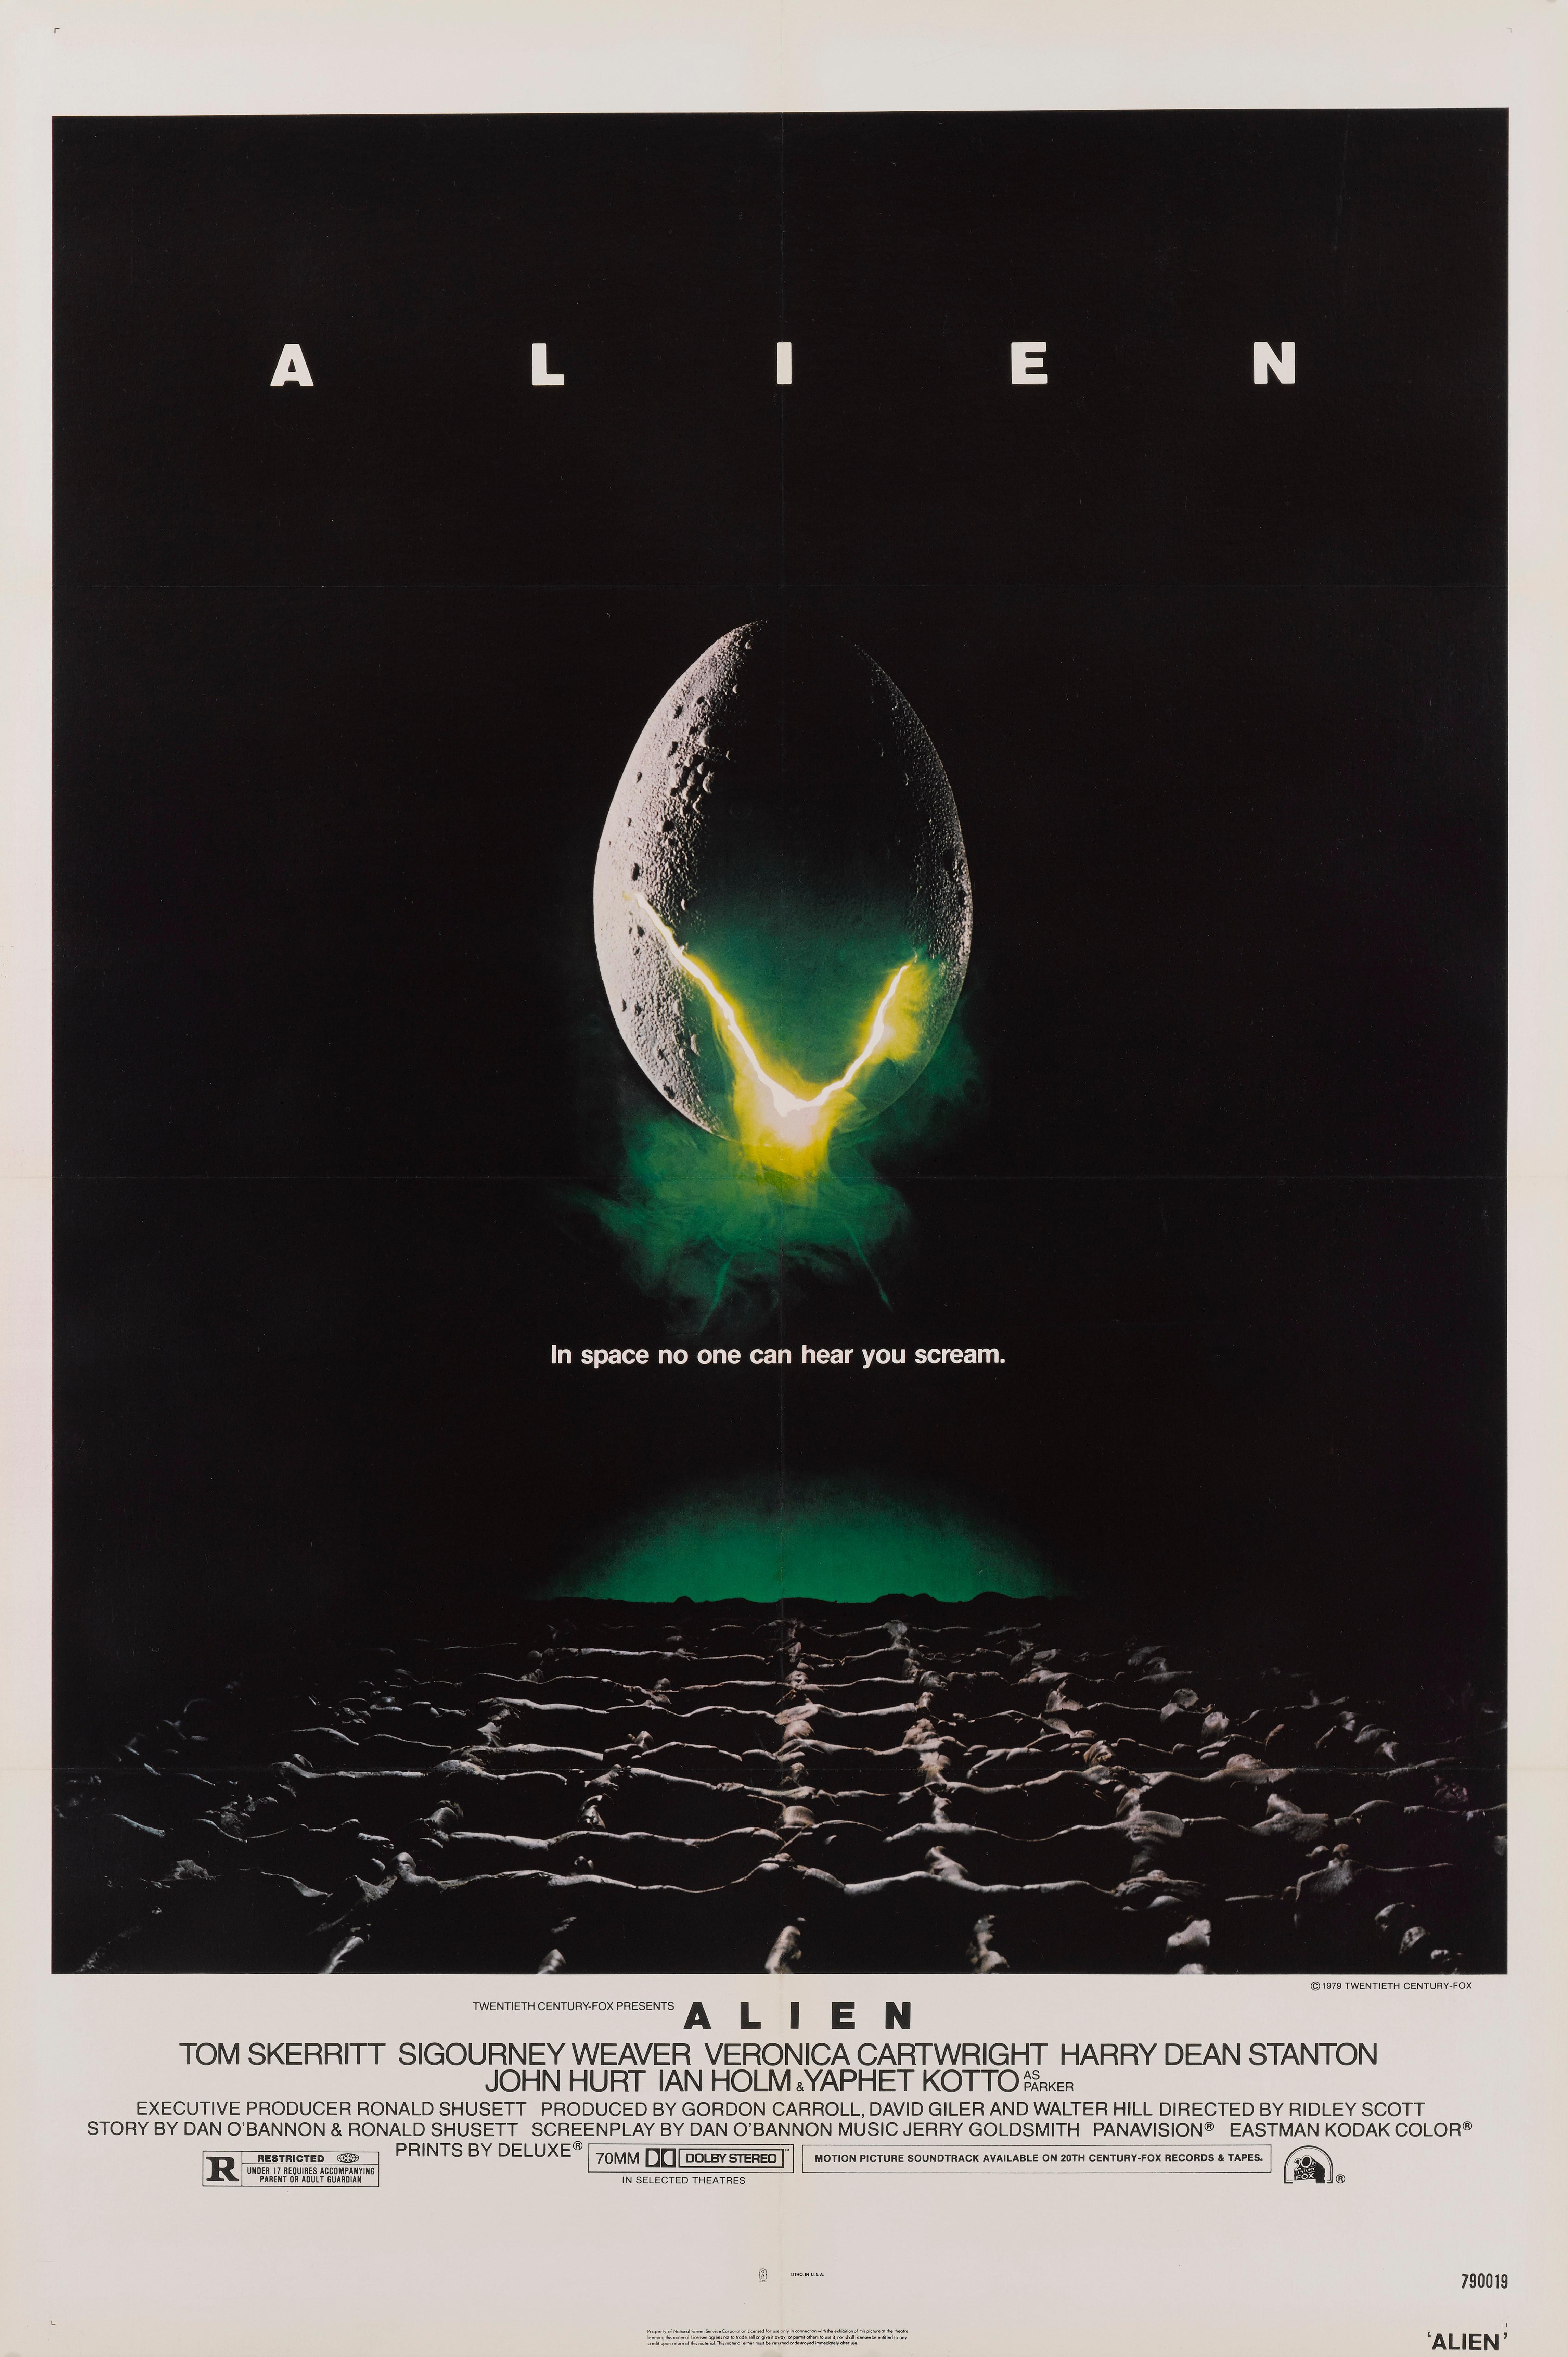 Original US film poster for Ridley Scott's Classic 1979 Science-Fiction movie,
starring Tom Skerritt, Sigourney Weaver, John Hurt. This poster was designed by the American poster artist Steve Frankfurt (1931-2012) It also features one of the most